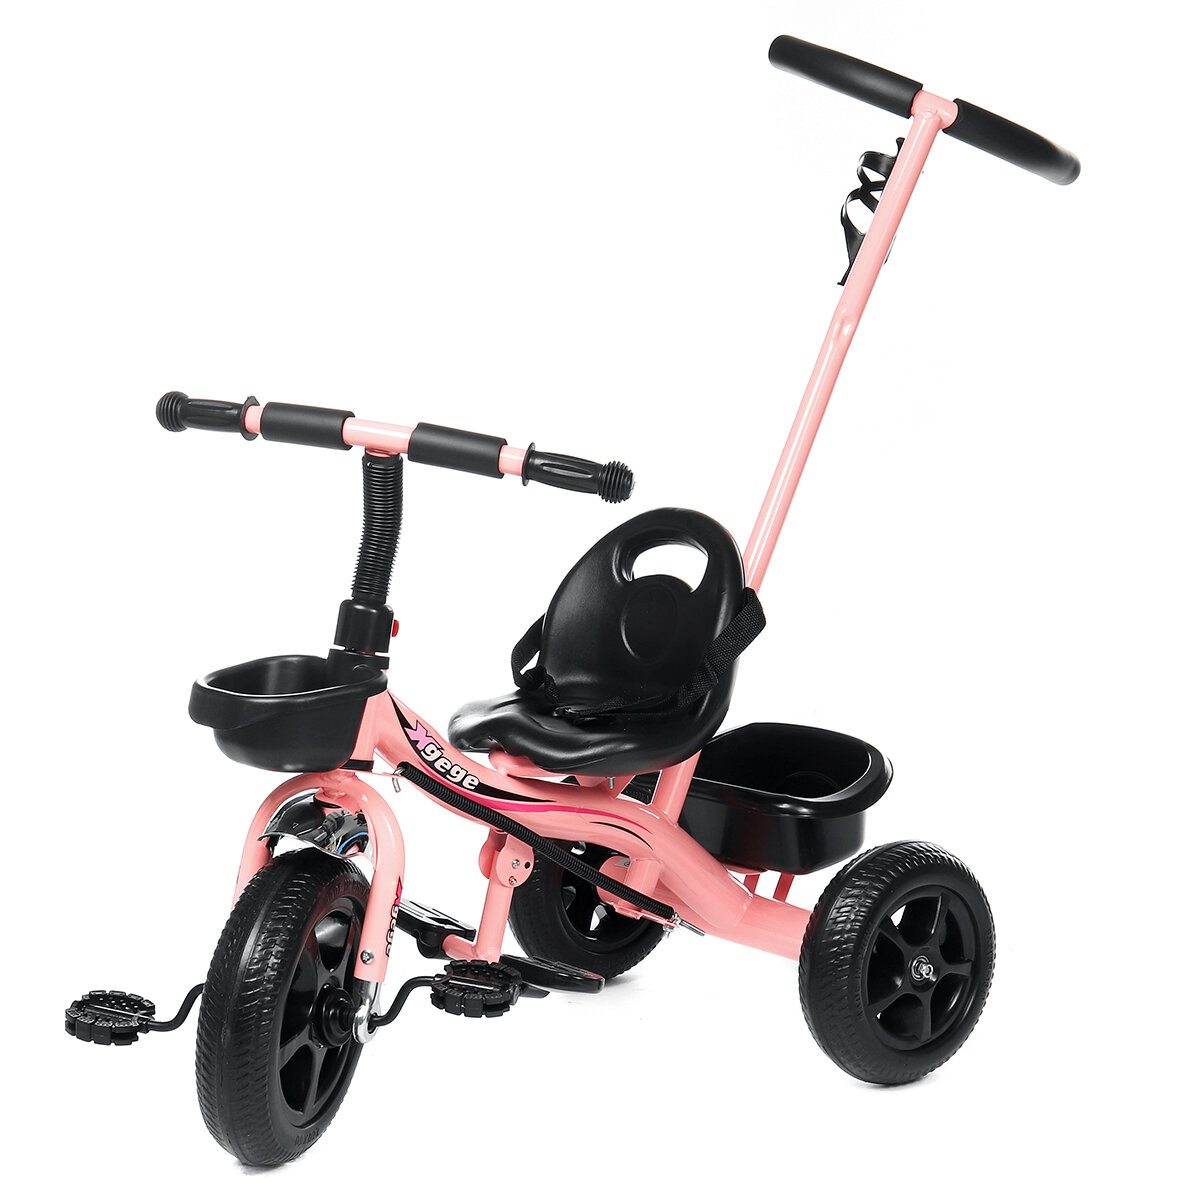 Baby Toddler Kids Tricycle Children Stroller Balance Bike with Detachable Pedal＆Pushing Handle Safety Seat for Aged 1-5